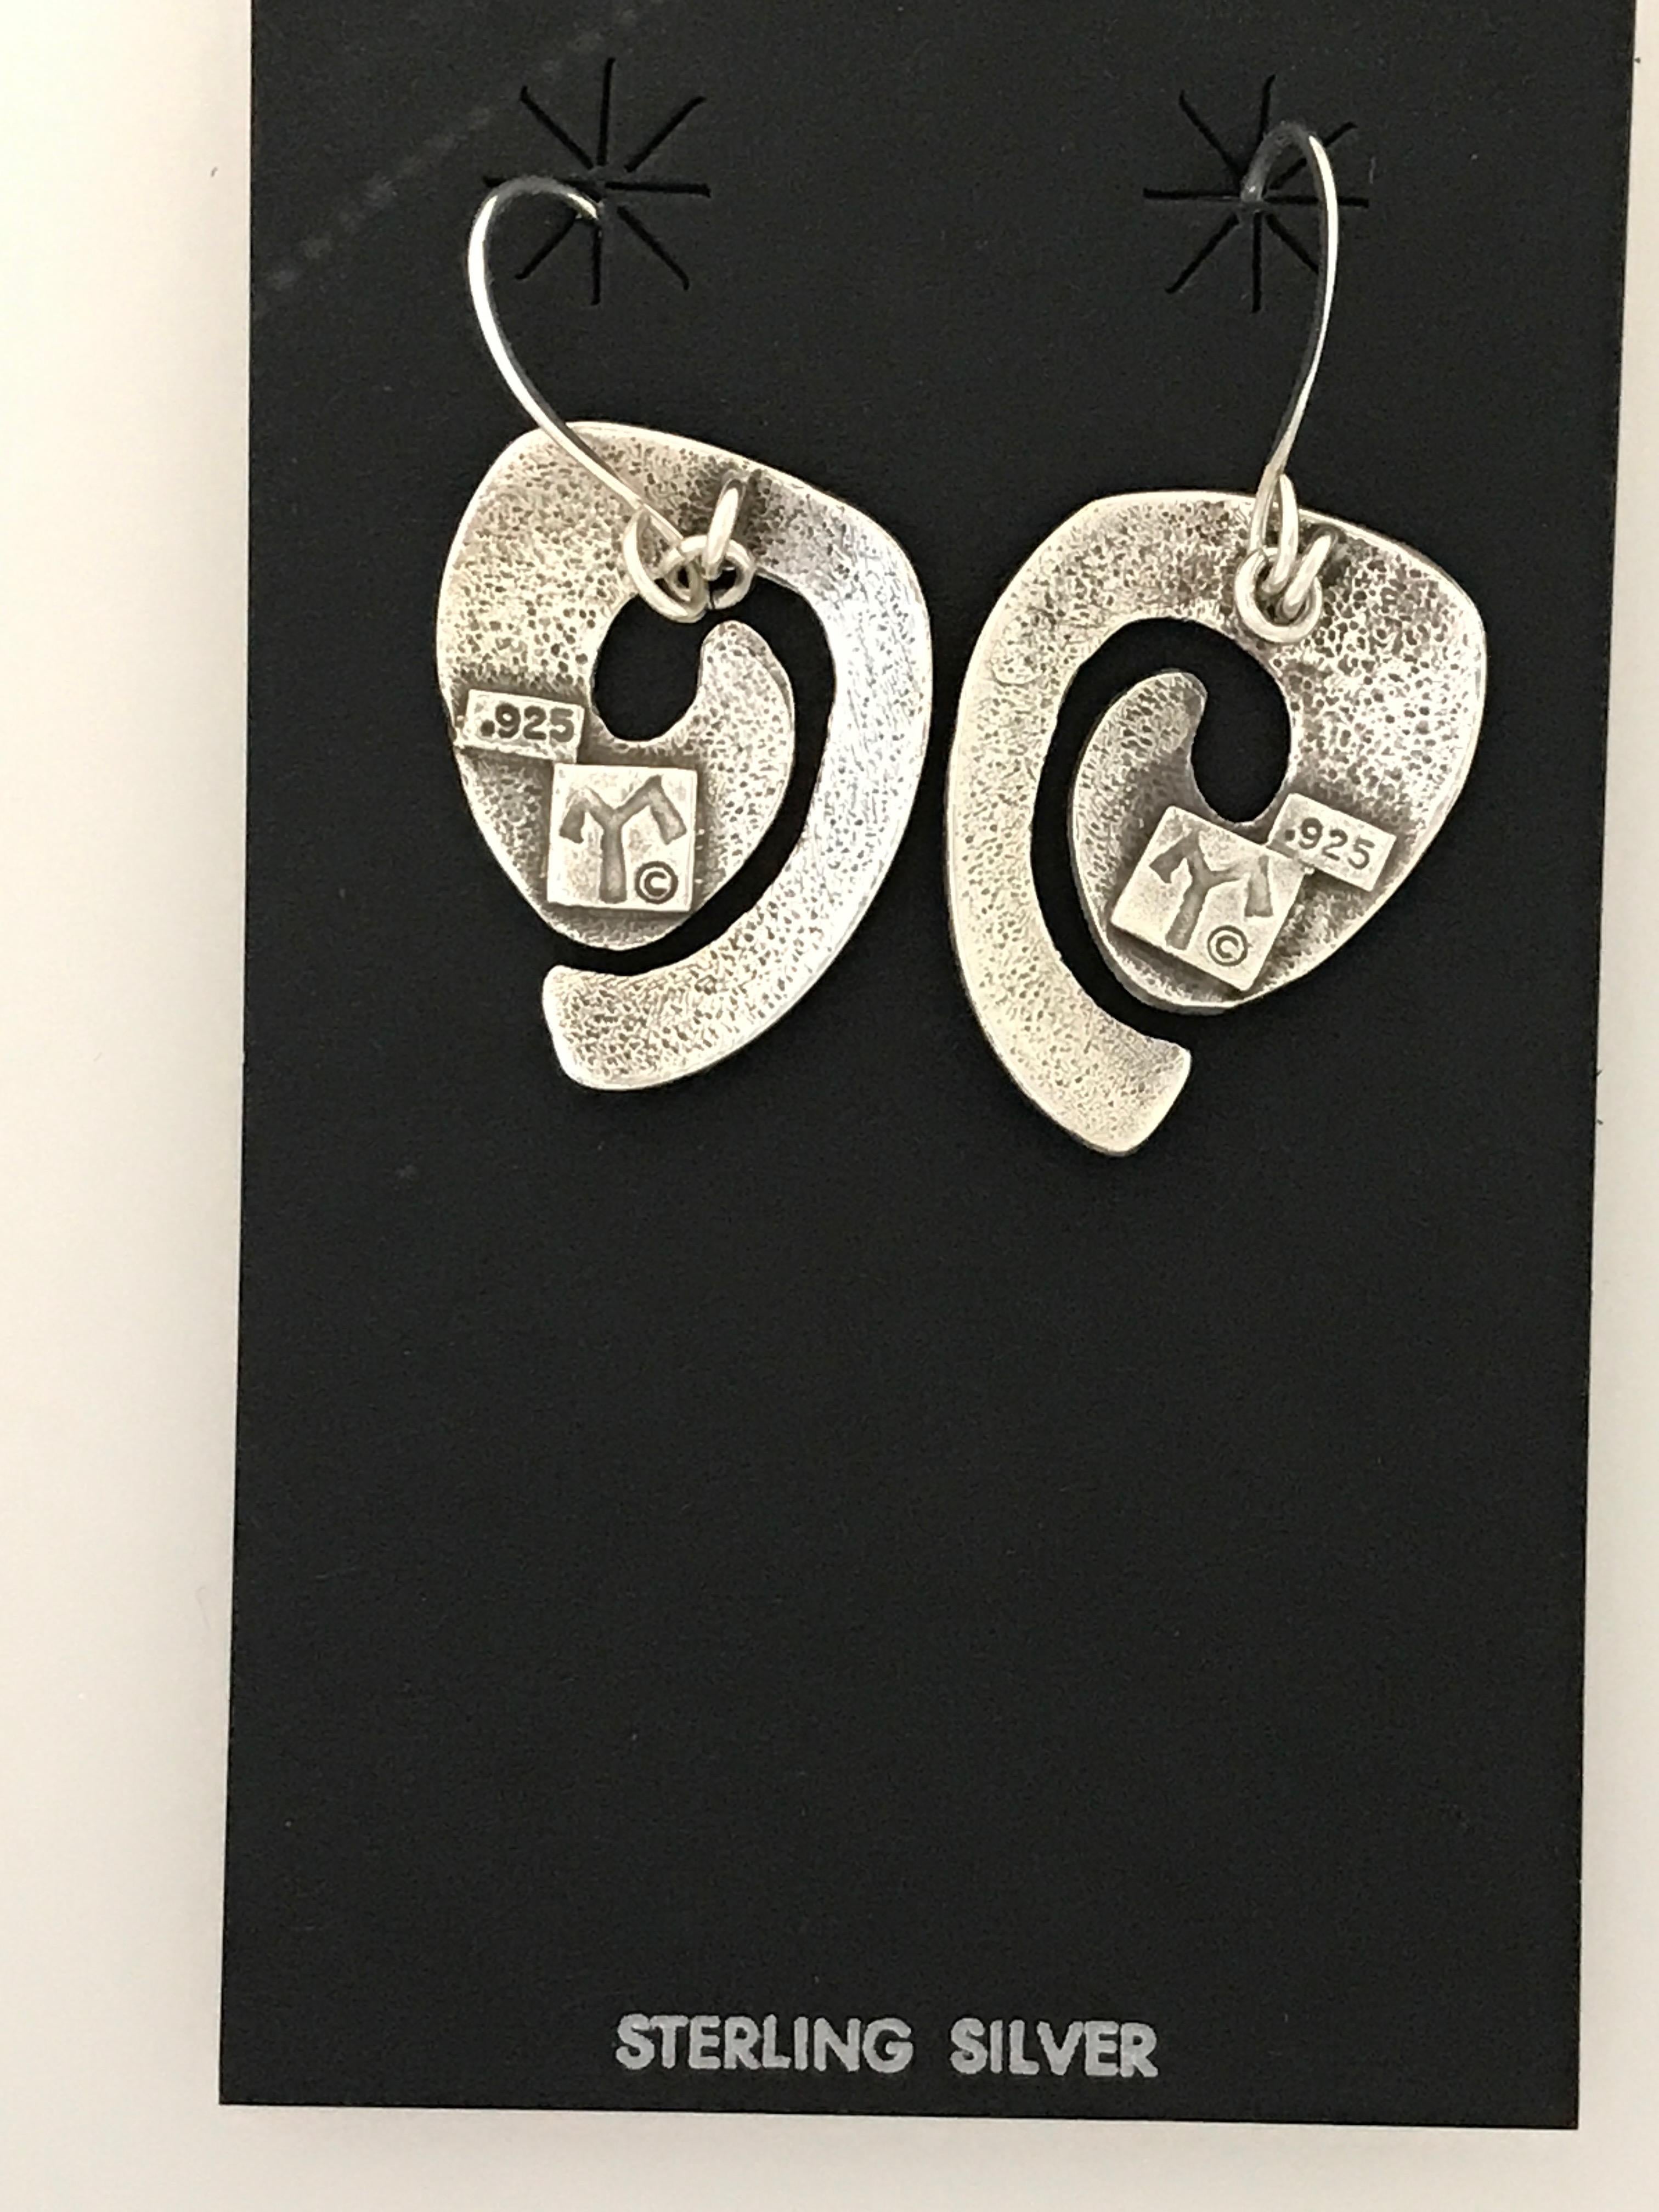 Swirls, dangle earrings, cast silver by Melanie Yazzie New Navajo contemporary

Melanie A. Yazzie (Navajo-Diné) is a highly regarded multimedia artist known for her printmaking, paintings, sculpture and jewelry designs.  

She has exhibited,